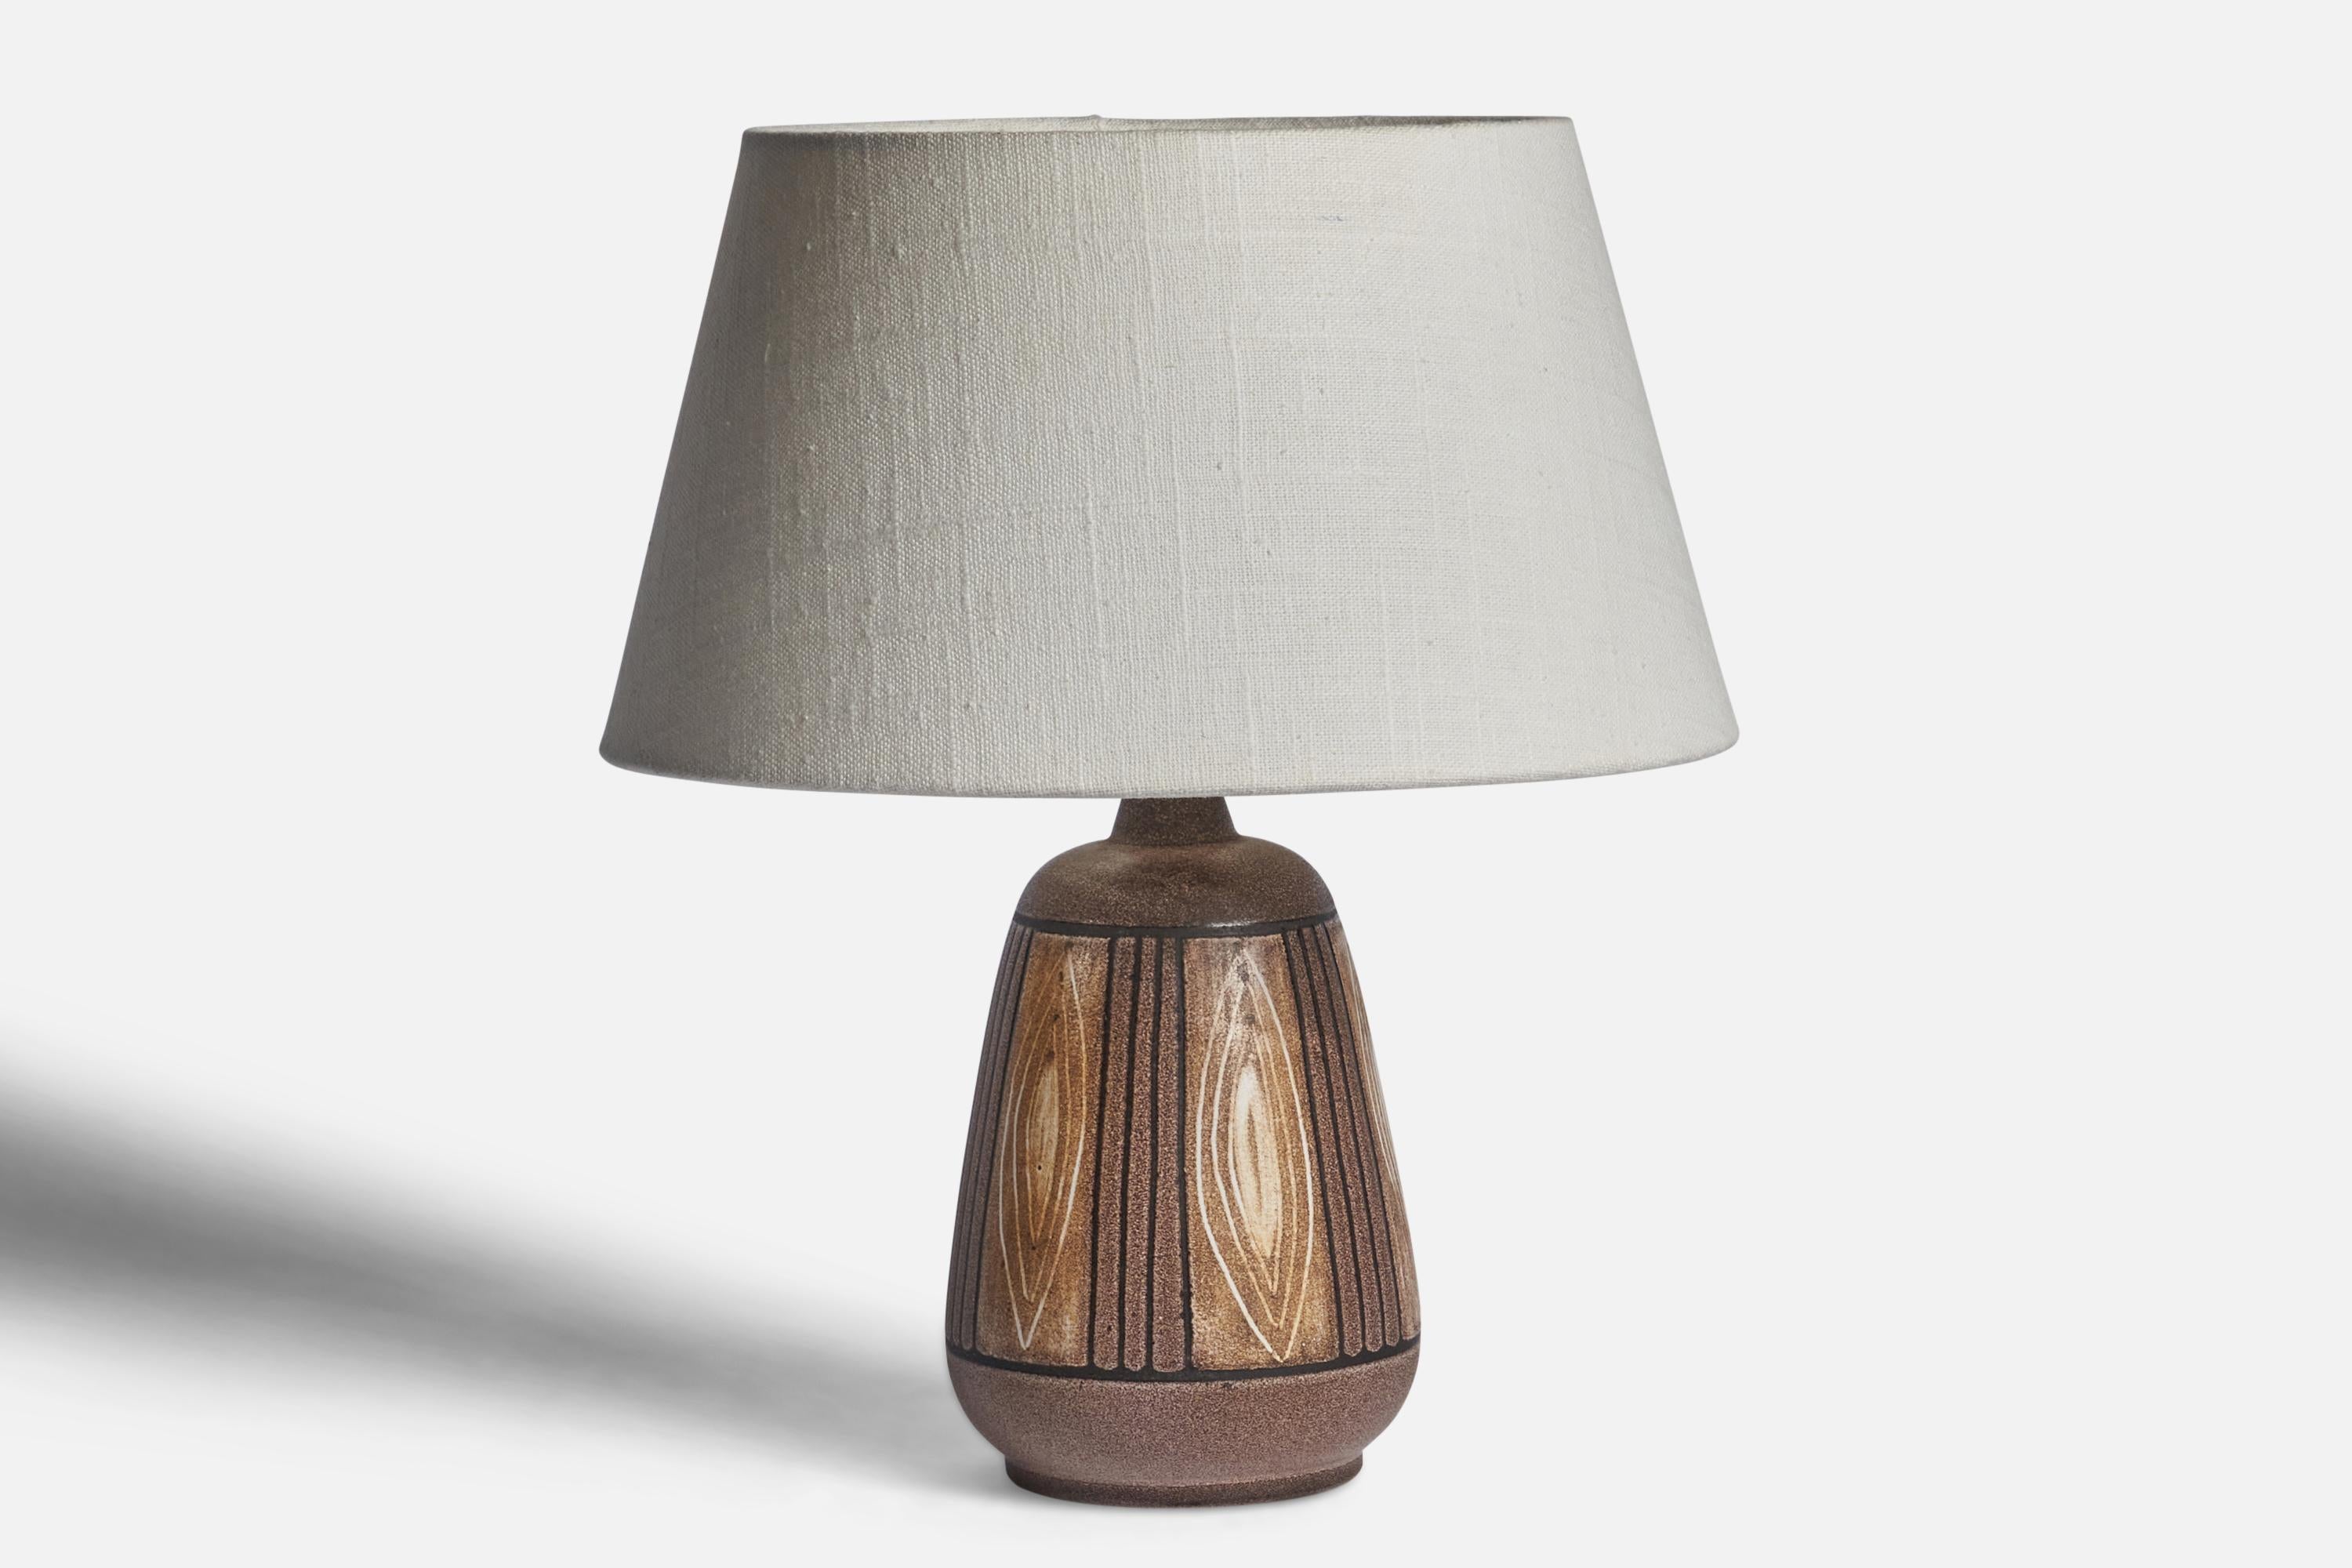 A brown-glazed and hand-painted stoneware table lamp designed by Bonnie Rehnqvist and produced by Törngrens Keramik, Sweden, 1970s.

Dimensions of Lamp (inches): 9” H x 4.5” Diameter
Dimensions of Shade (inches): 7” Top Diameter x 10” Bottom